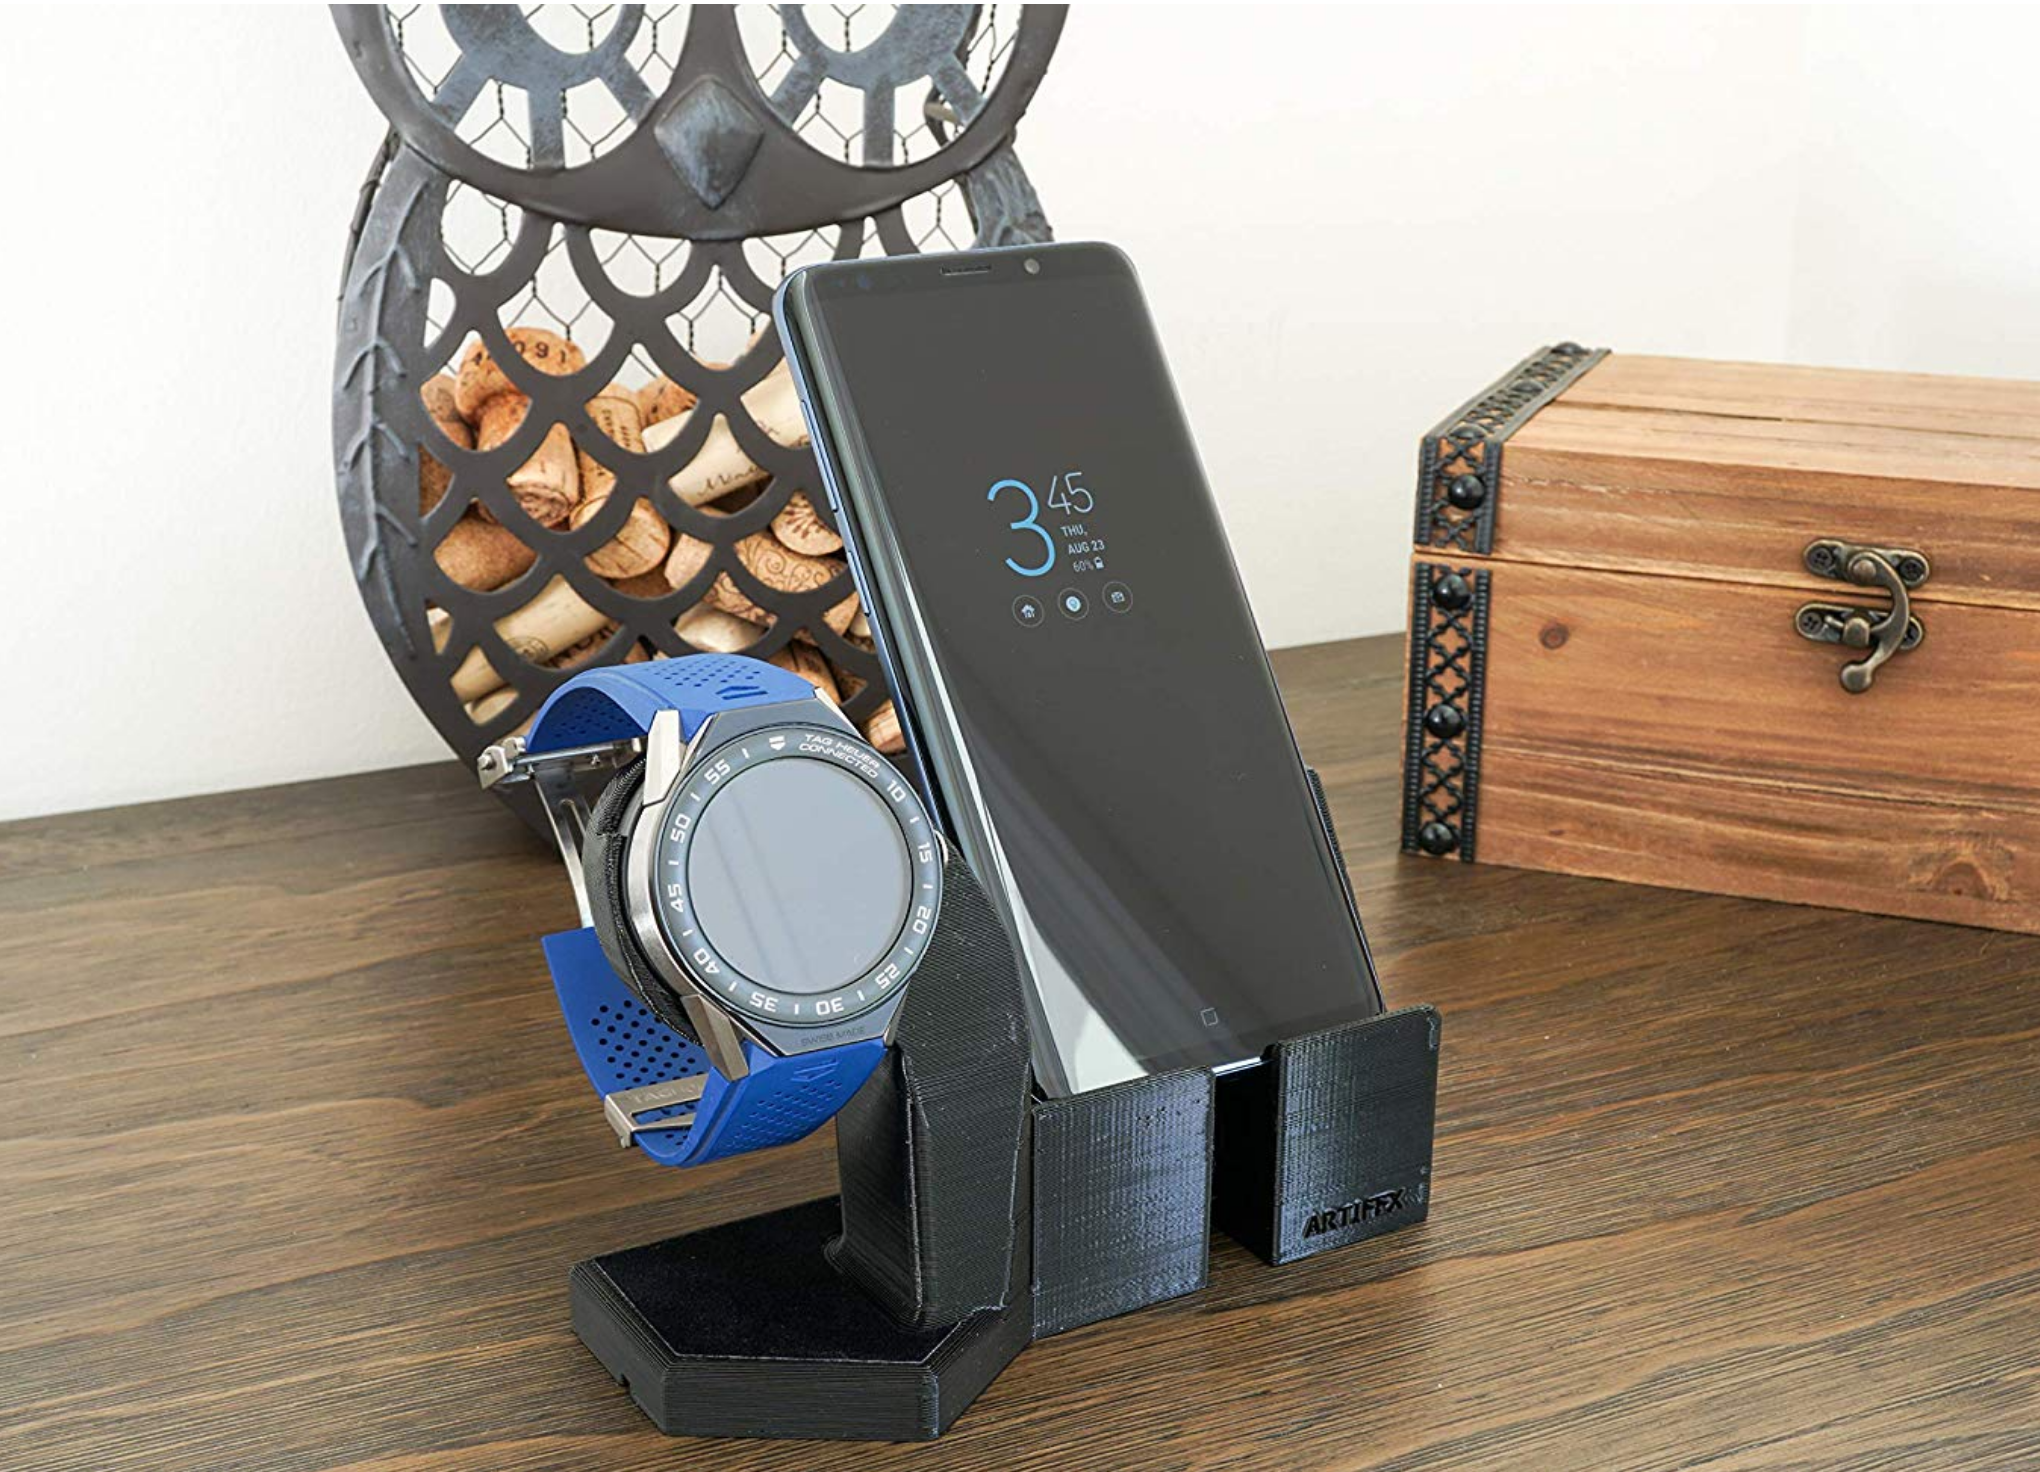 Artifex Design Stand for 2nd Generation TAG Heuer Connected Modular 45 Smartwatch, Phone Combo - Artifex Design 3D